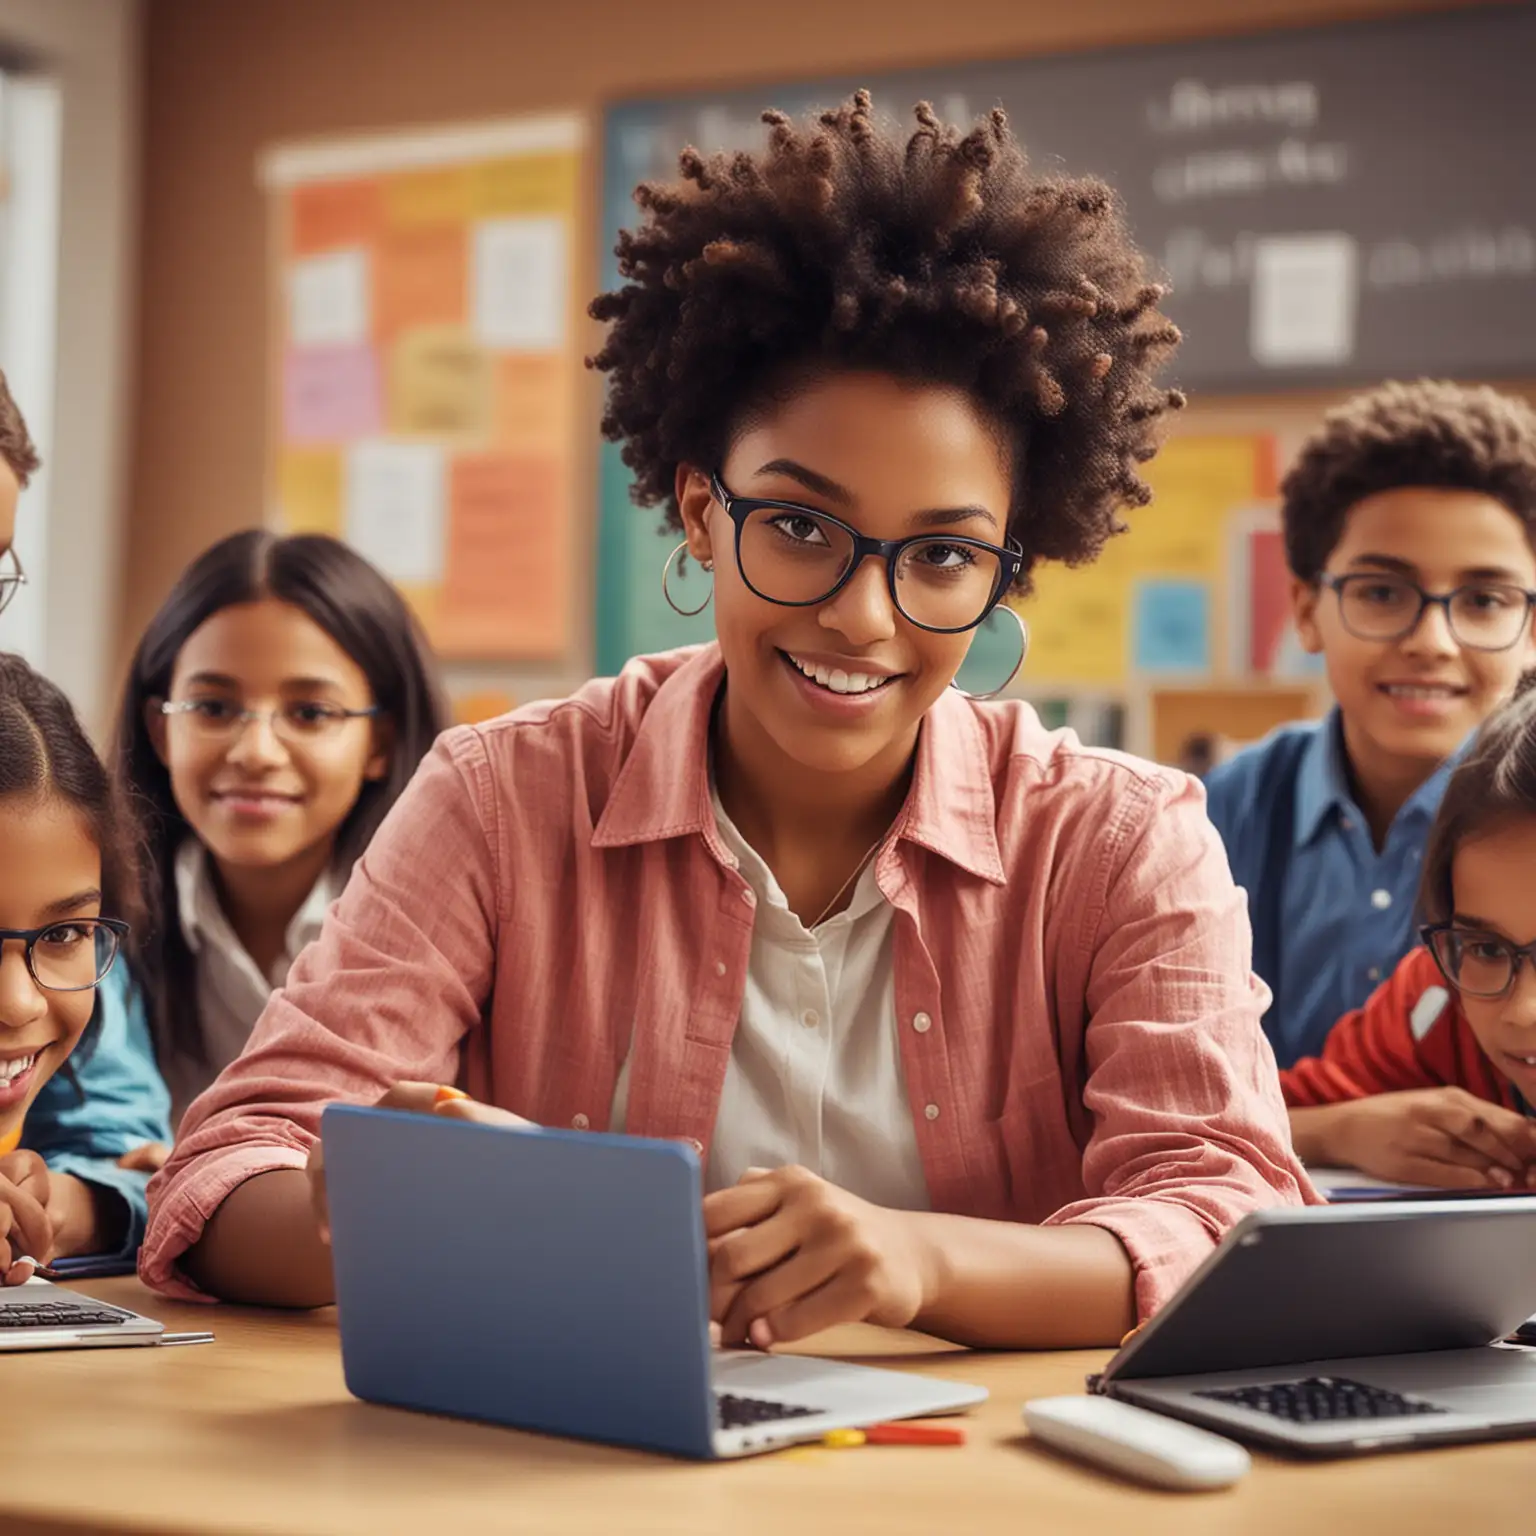 Dynamic Classroom Scene Engaging Teacher and Diverse Students with Educational Technology